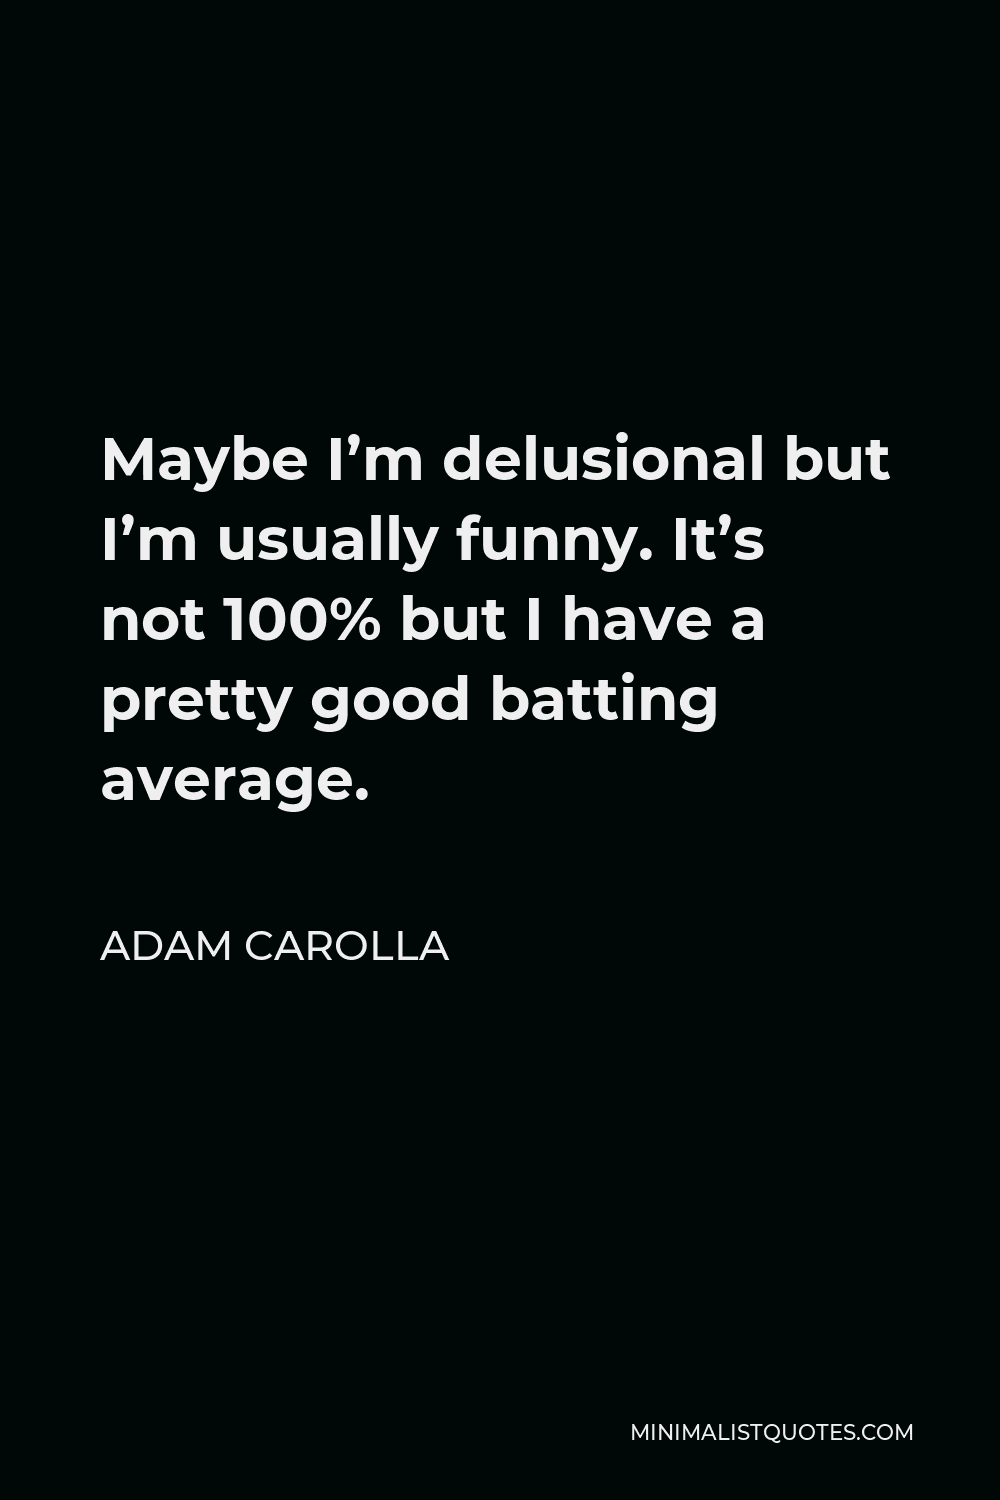 Adam Carolla Quote - Maybe I’m delusional but I’m usually funny. It’s not 100% but I have a pretty good batting average.